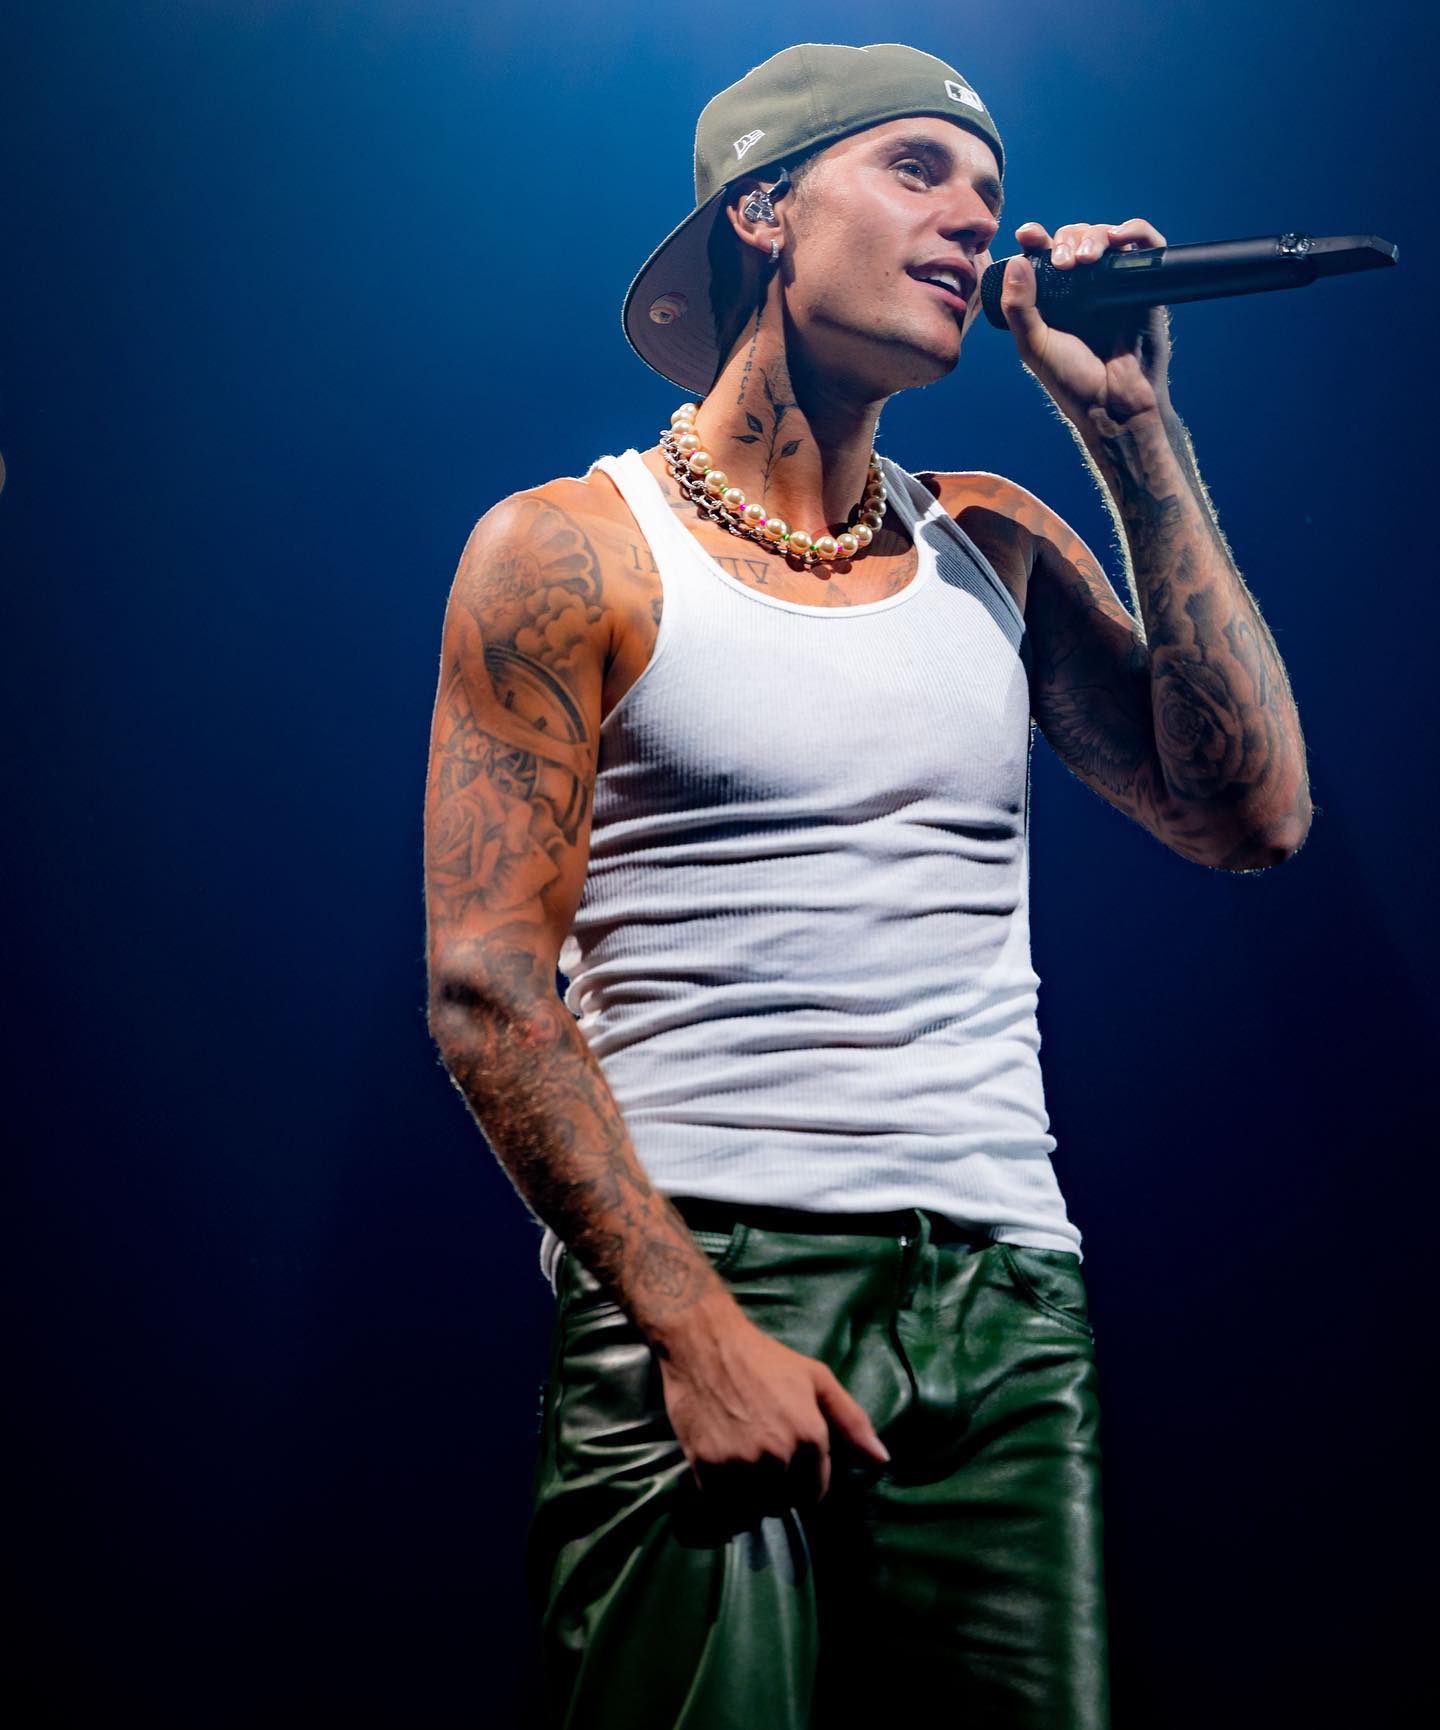 Justin Bieber's upcoming concerts have been postponed due to illness